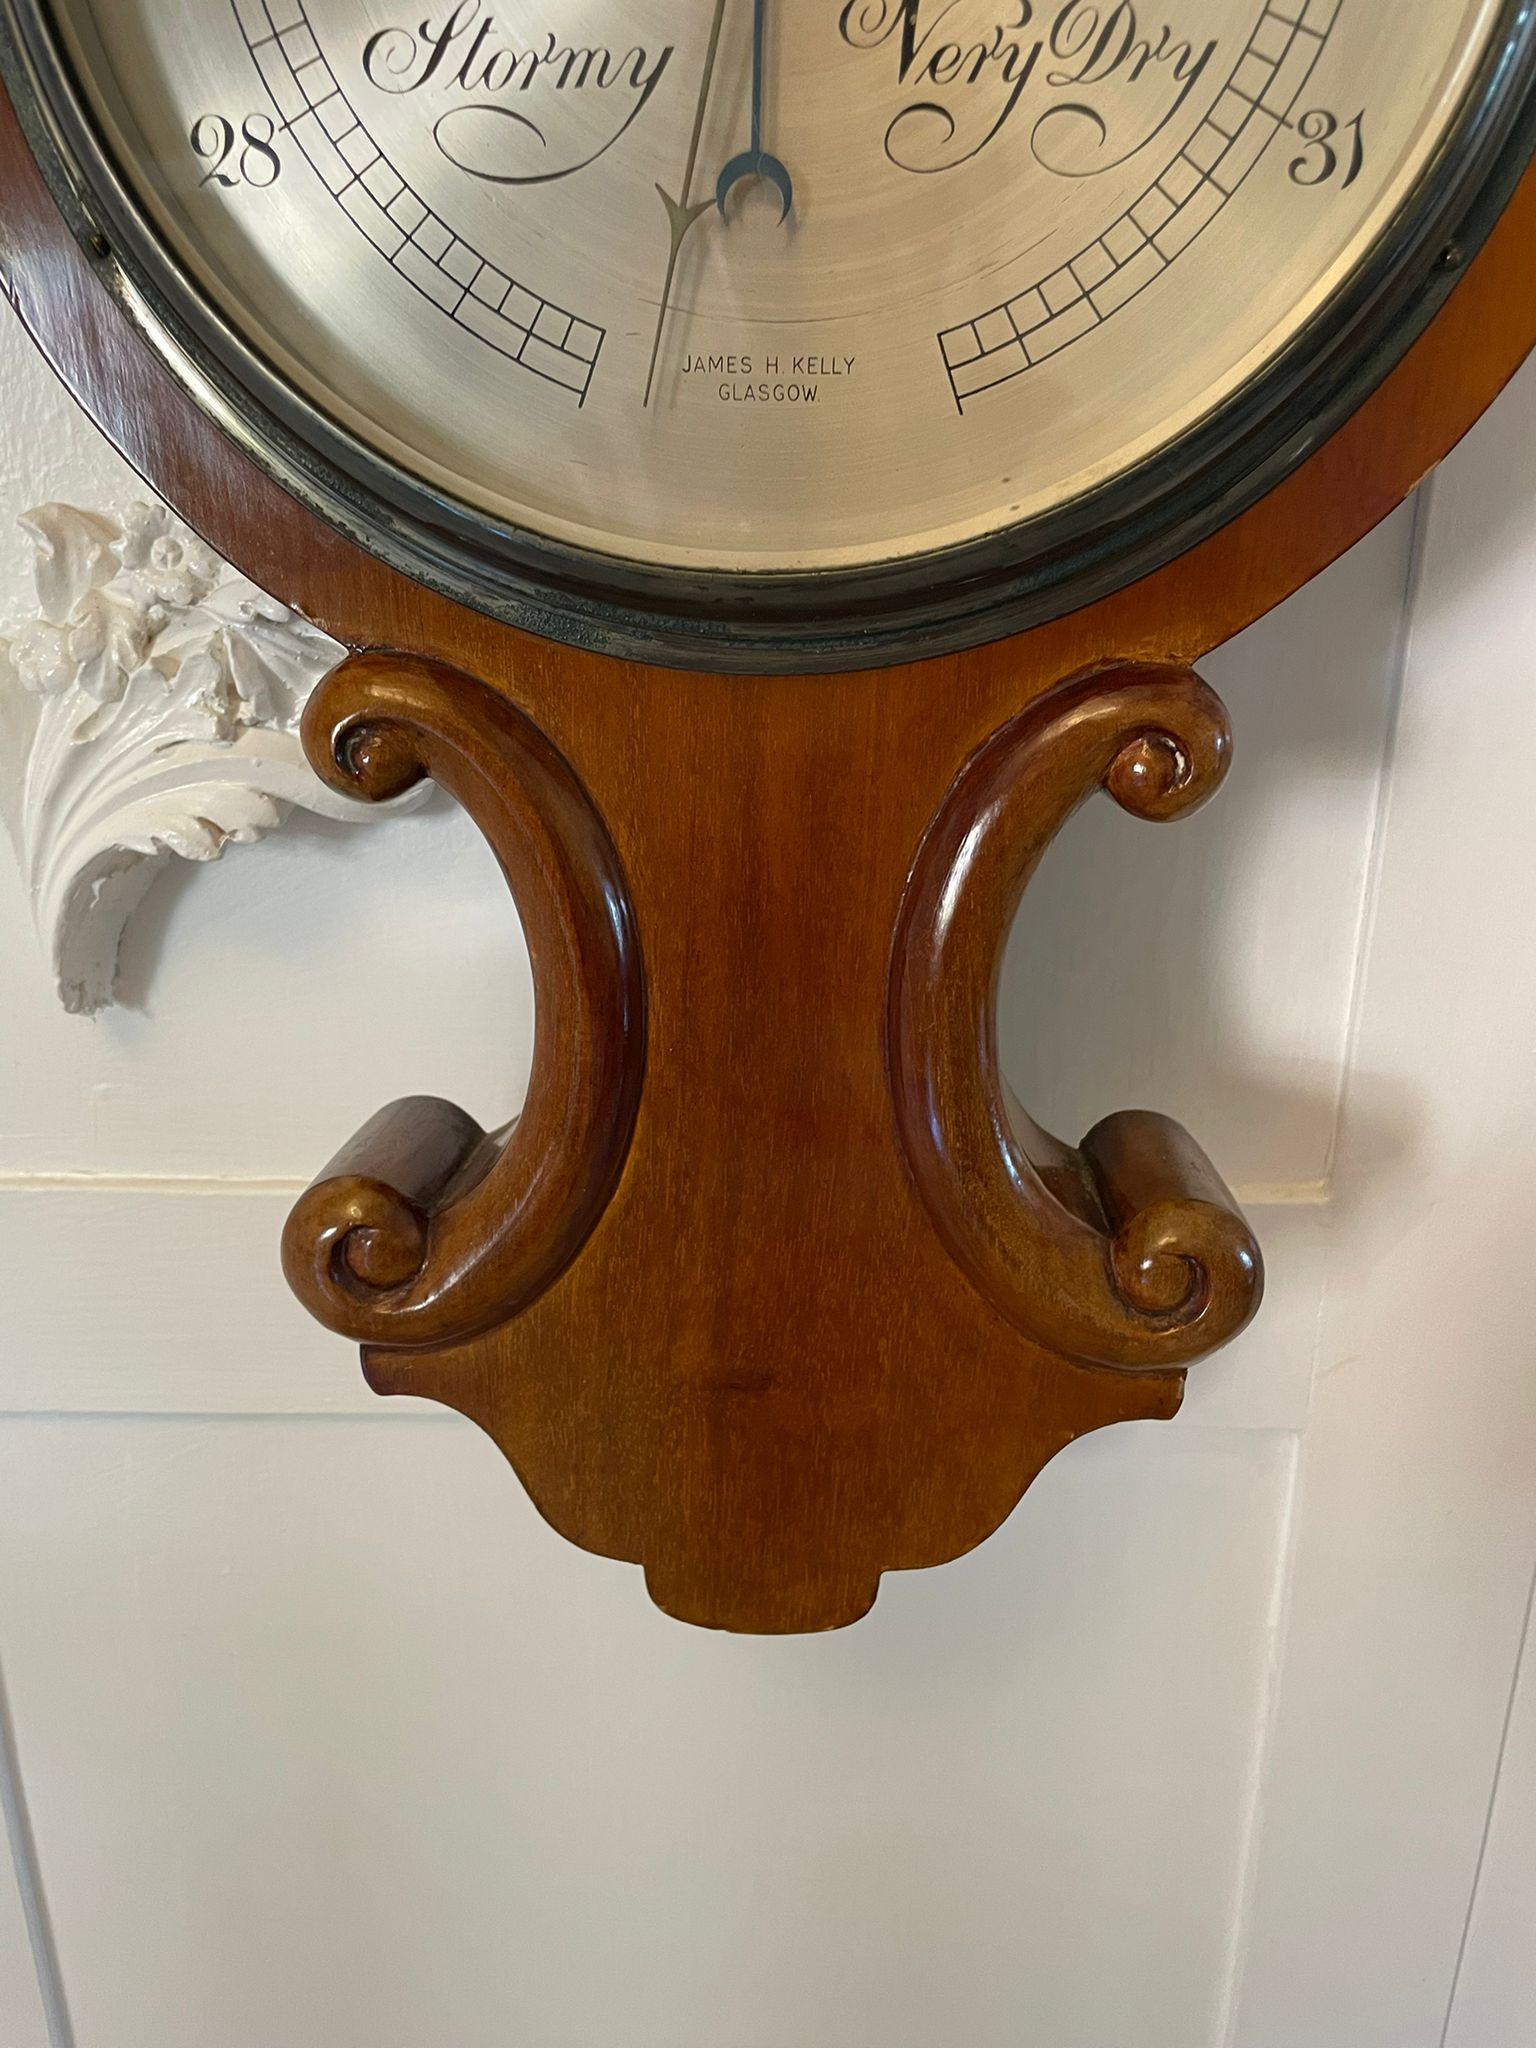 Late 19th Century Antique Victorian Quality Mahogany Banjo Barometer by James H Kelly of Glasgow  For Sale